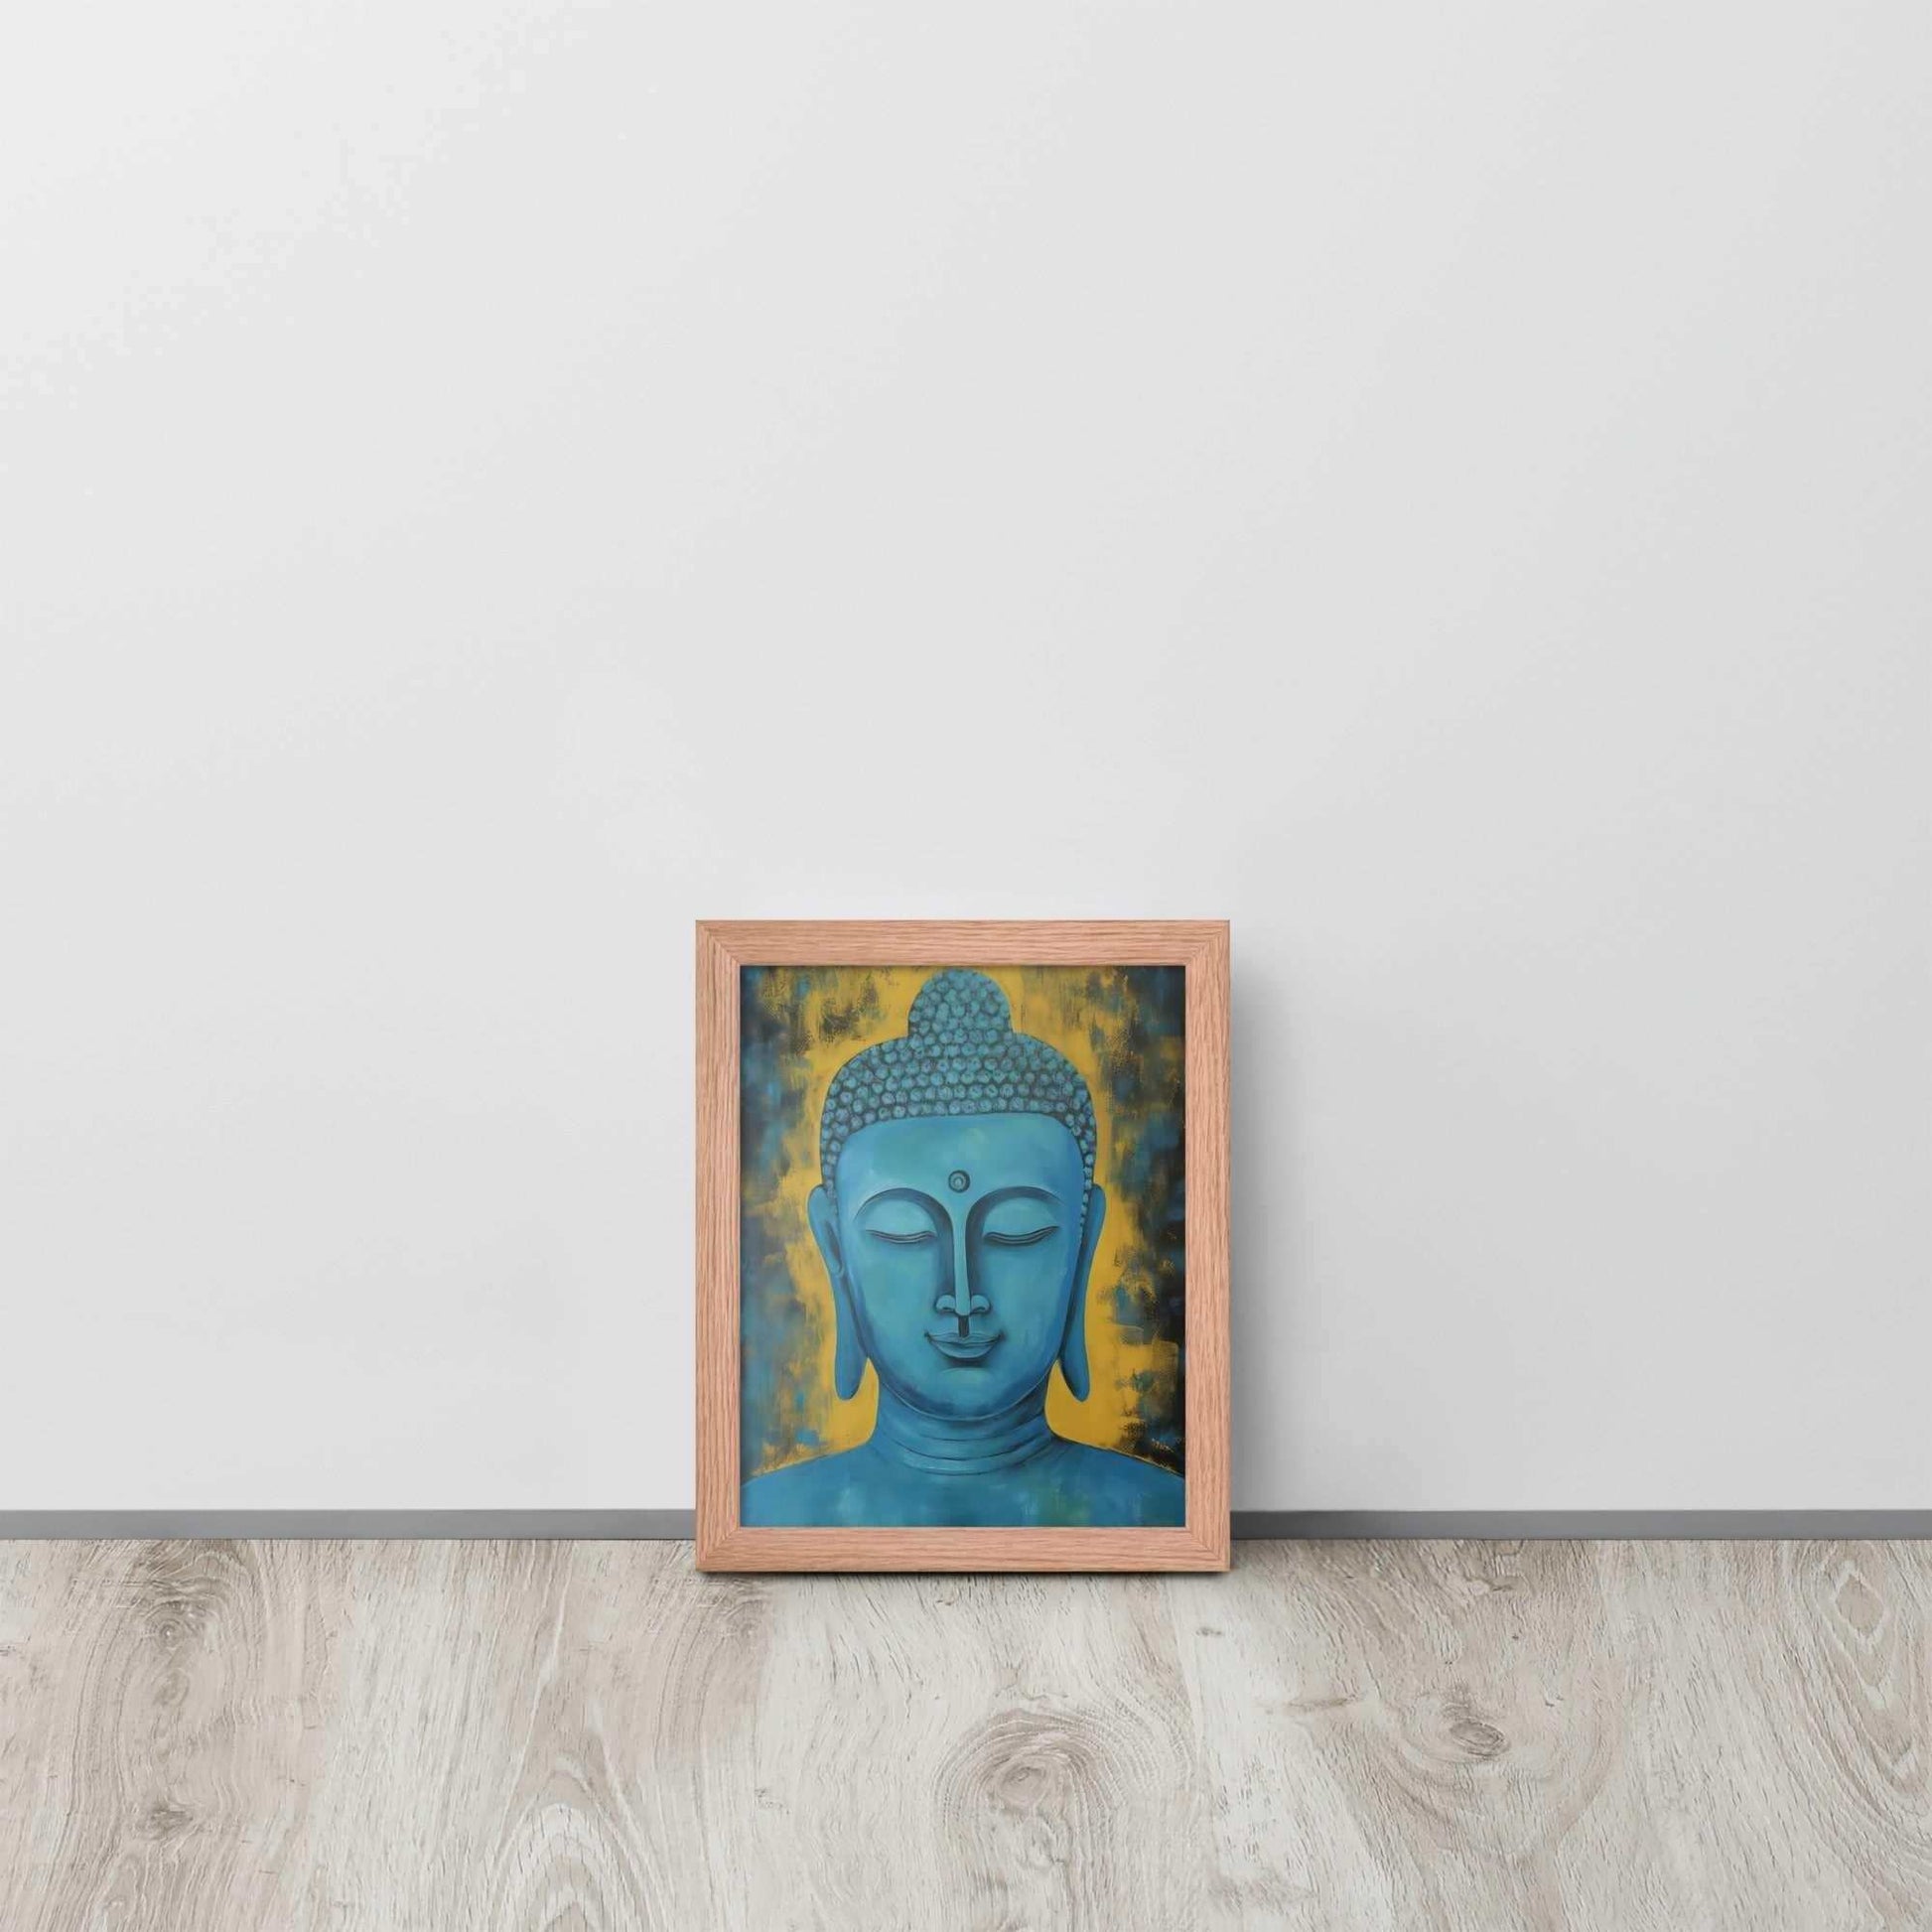 A red oak framed poster displays a Blue Buddha Healing Tibetan Art against a golden yellow background with dark, leaf-like impressions, creating a serene and contemplative artwork, propped on a light wooden floor against a white wall.